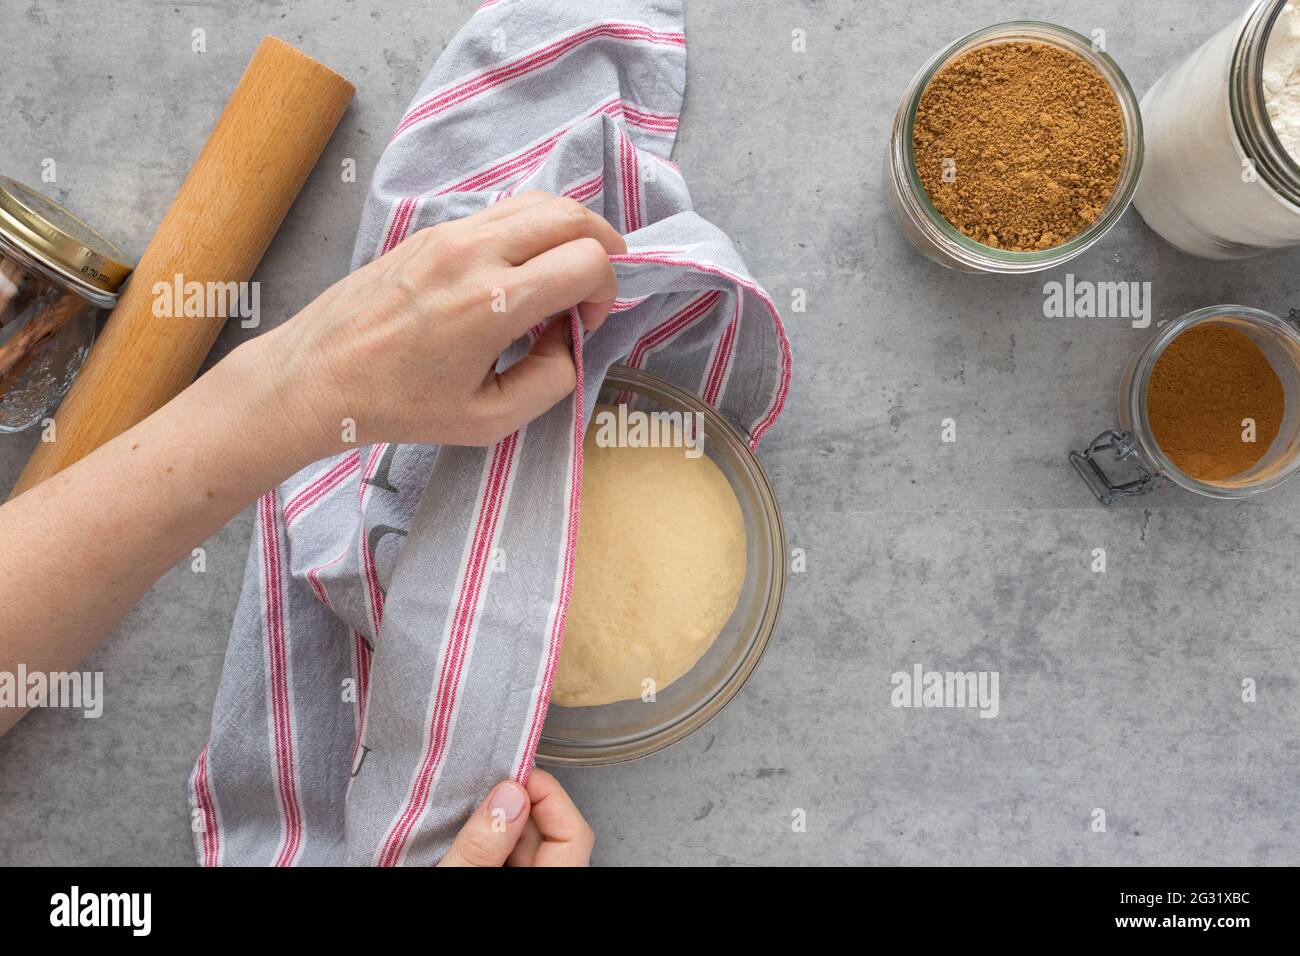 Woman hands covering a cinnamon roll dough with a kitchen cloth for rising. Stock Photo